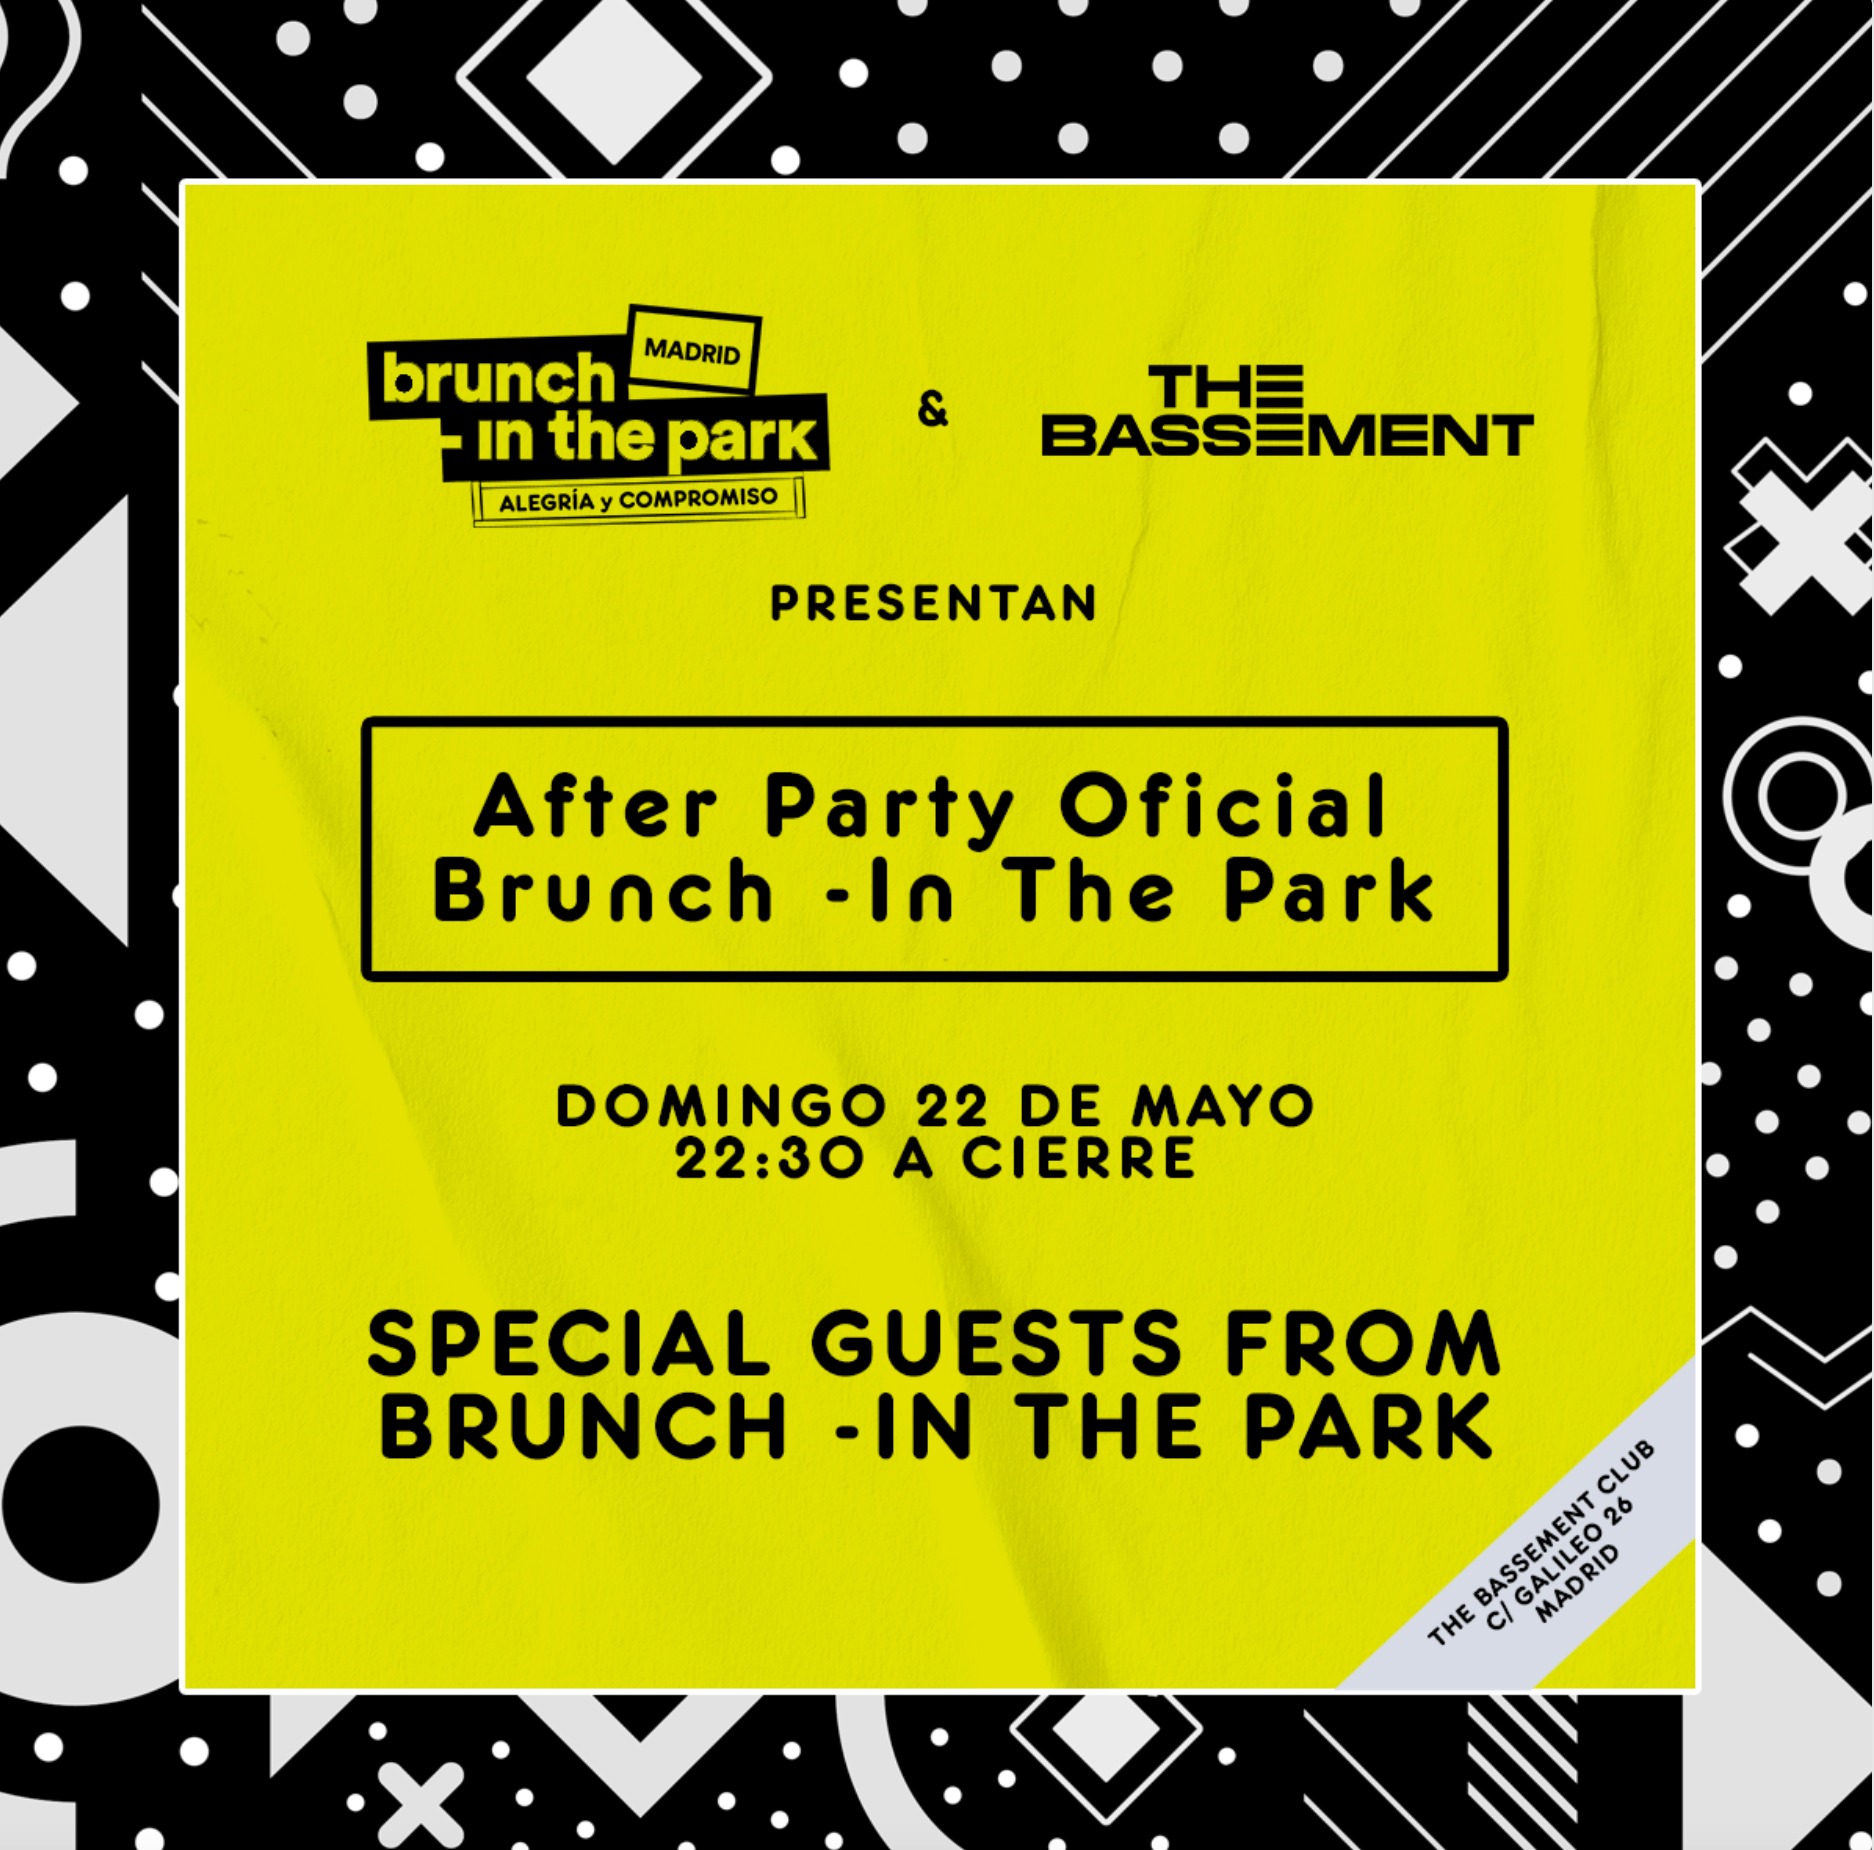 THE-BASSMENT-AFTER-BRUNCH-IN-THE-PARK-22MAY